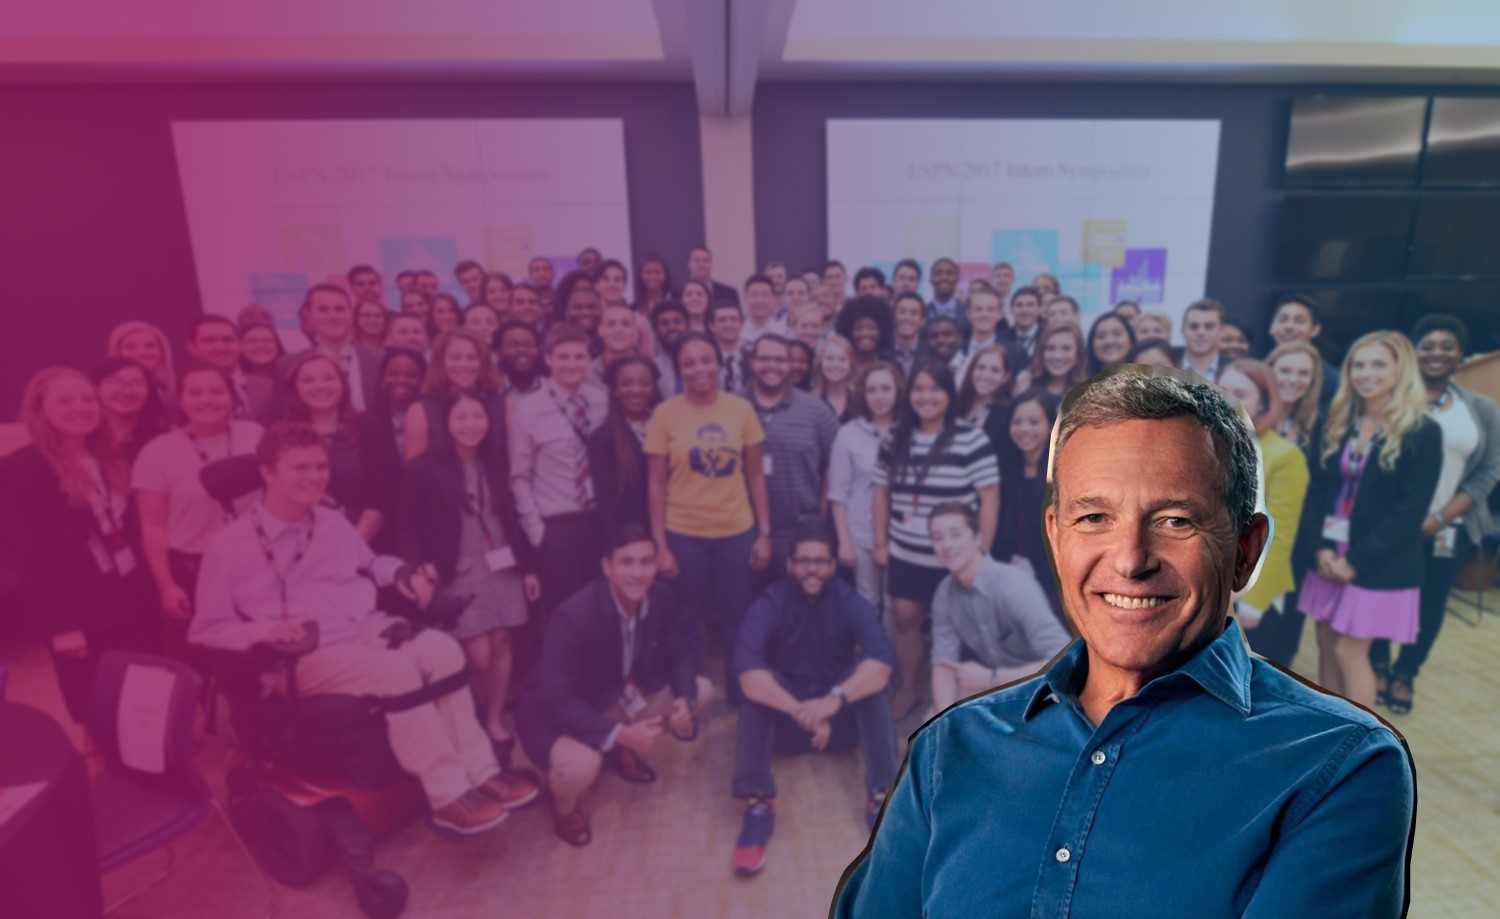 Disney CEO collaborate with young professionals in workshop